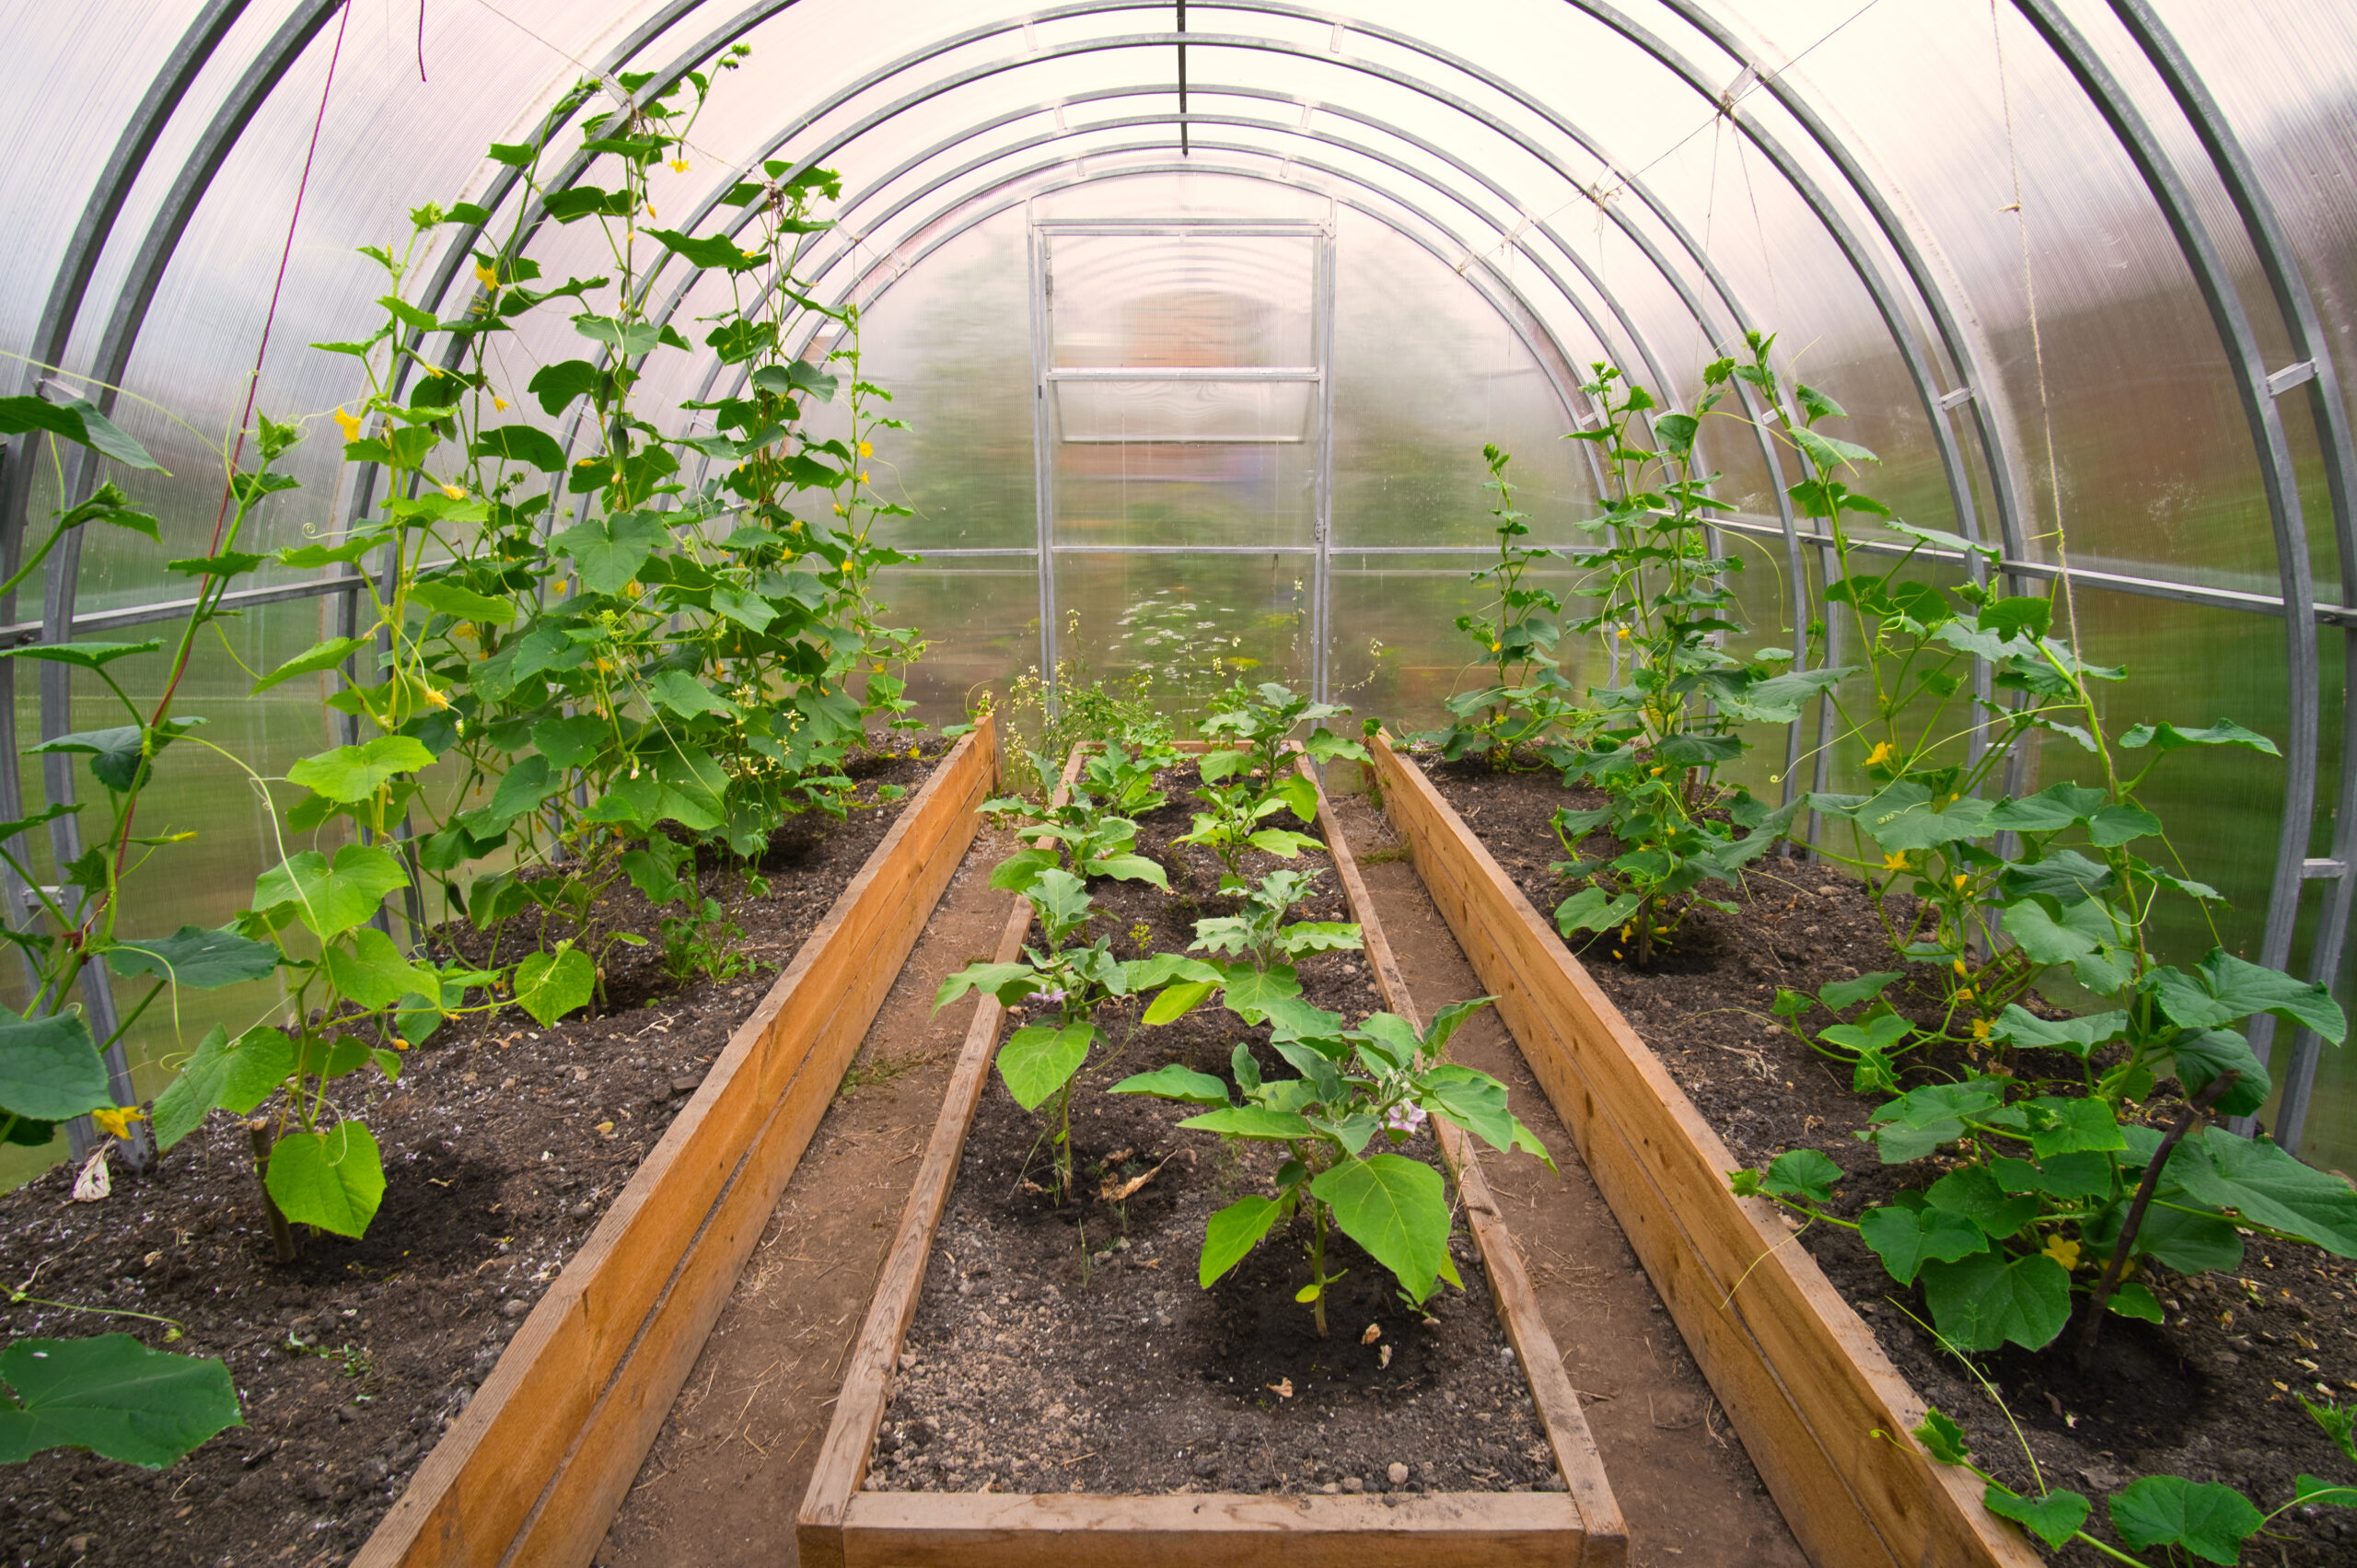 an image of a high tunnel greenhouse with crops inside